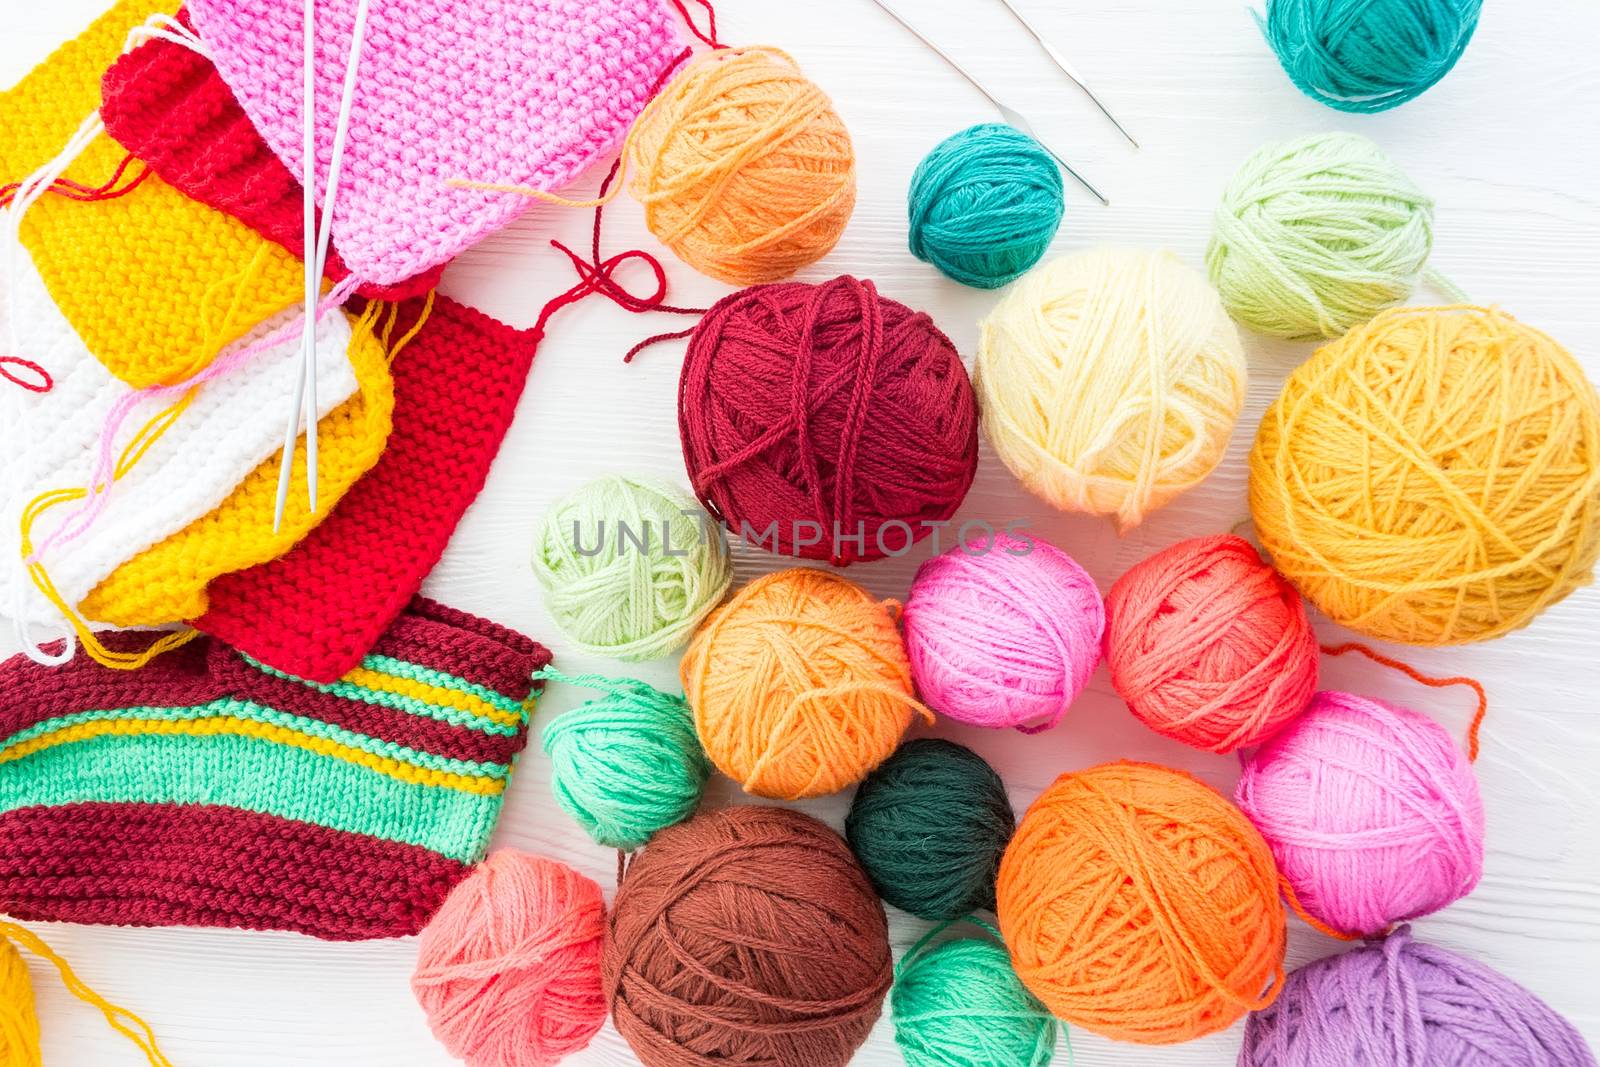 The photo shows the knitting needles with a ball